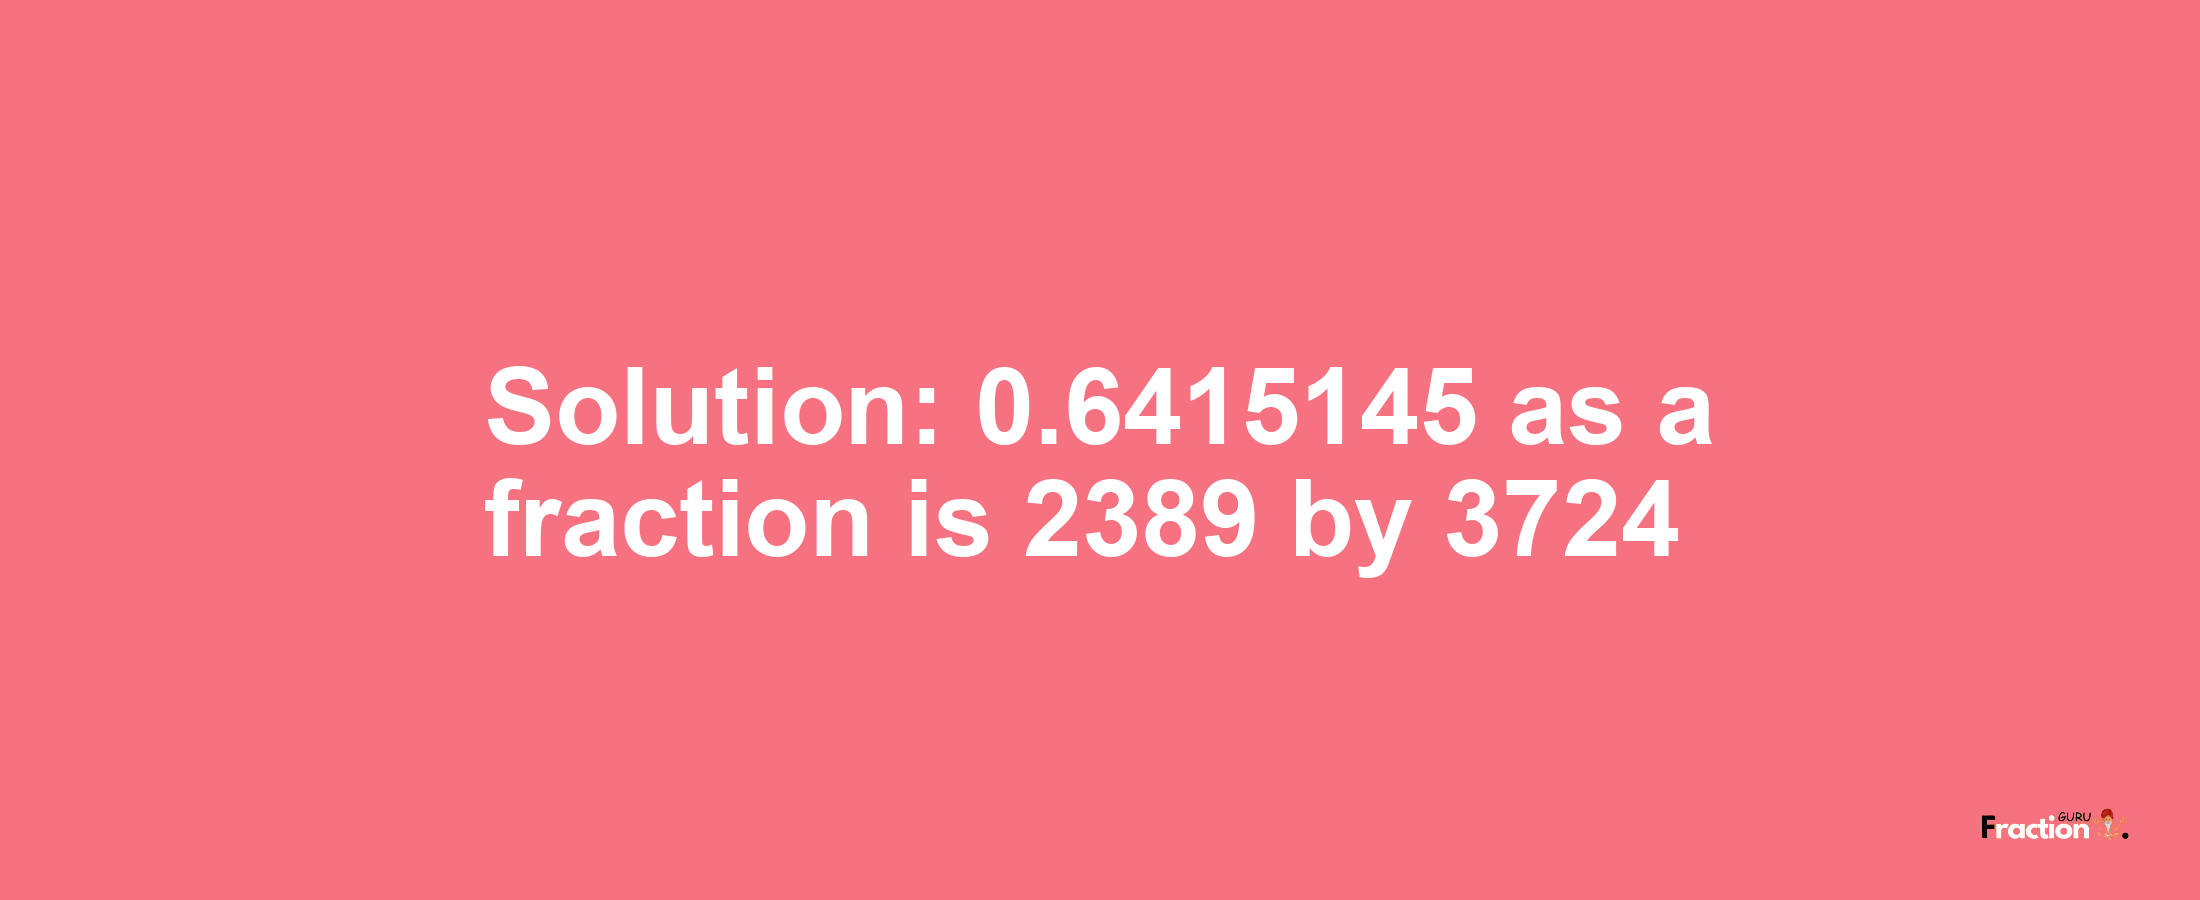 Solution:0.6415145 as a fraction is 2389/3724